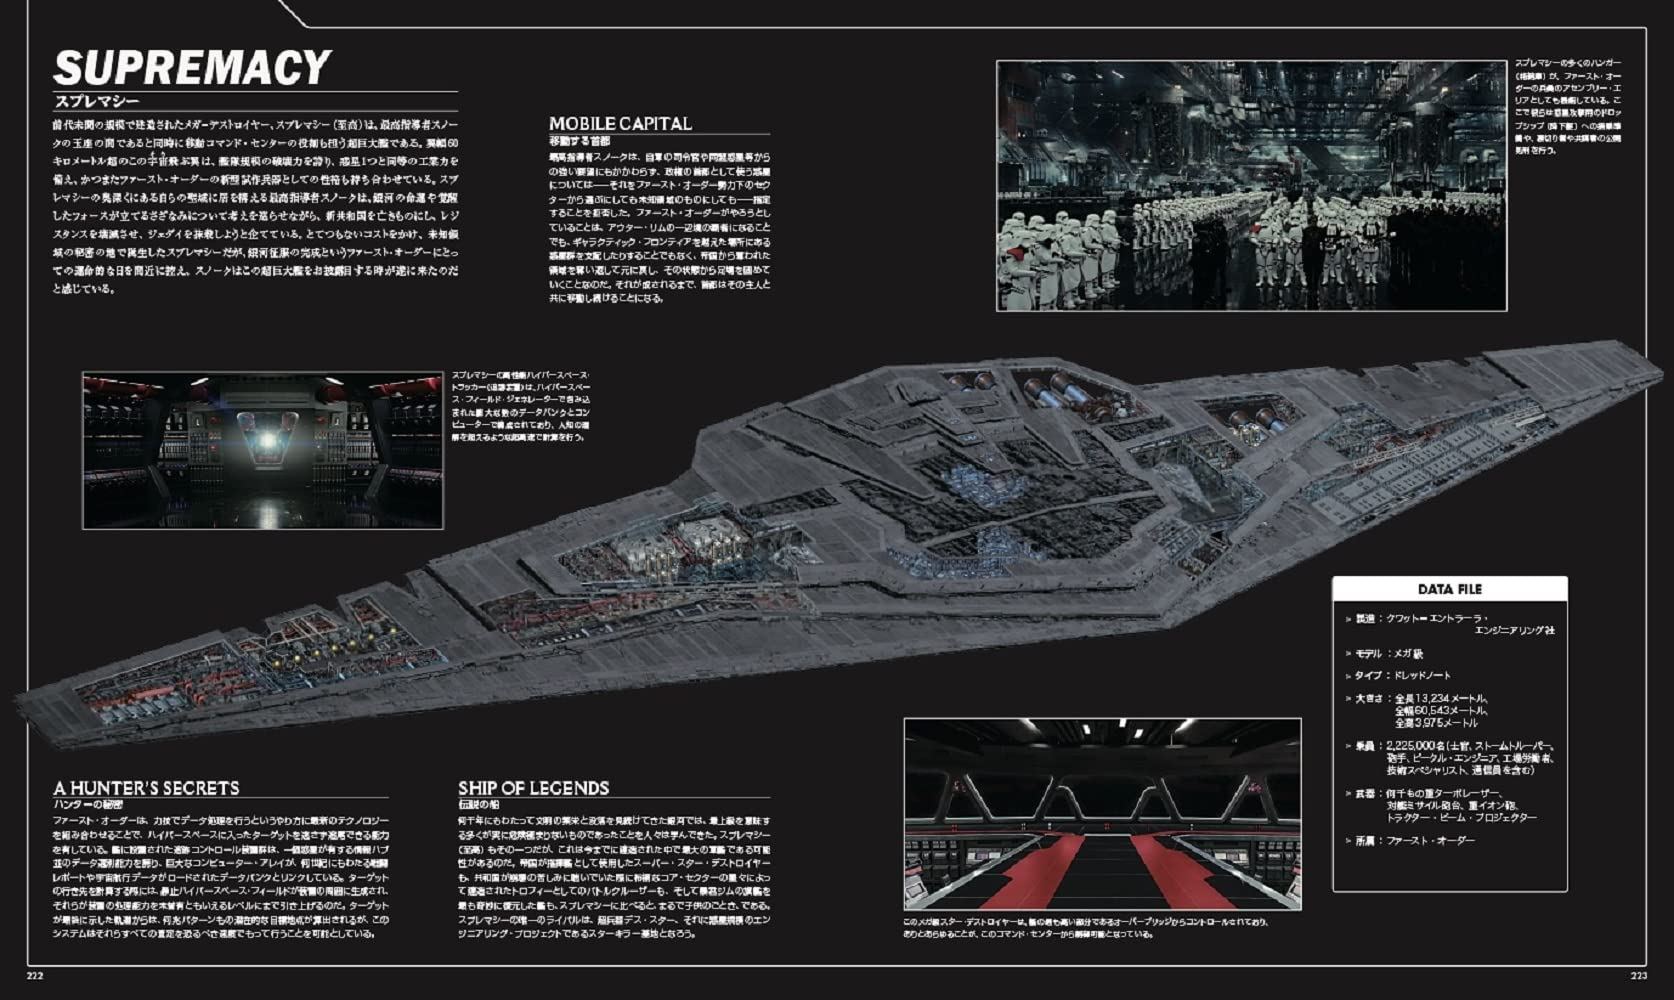 Star Wars / Vehicle Cross Section Complete Edition